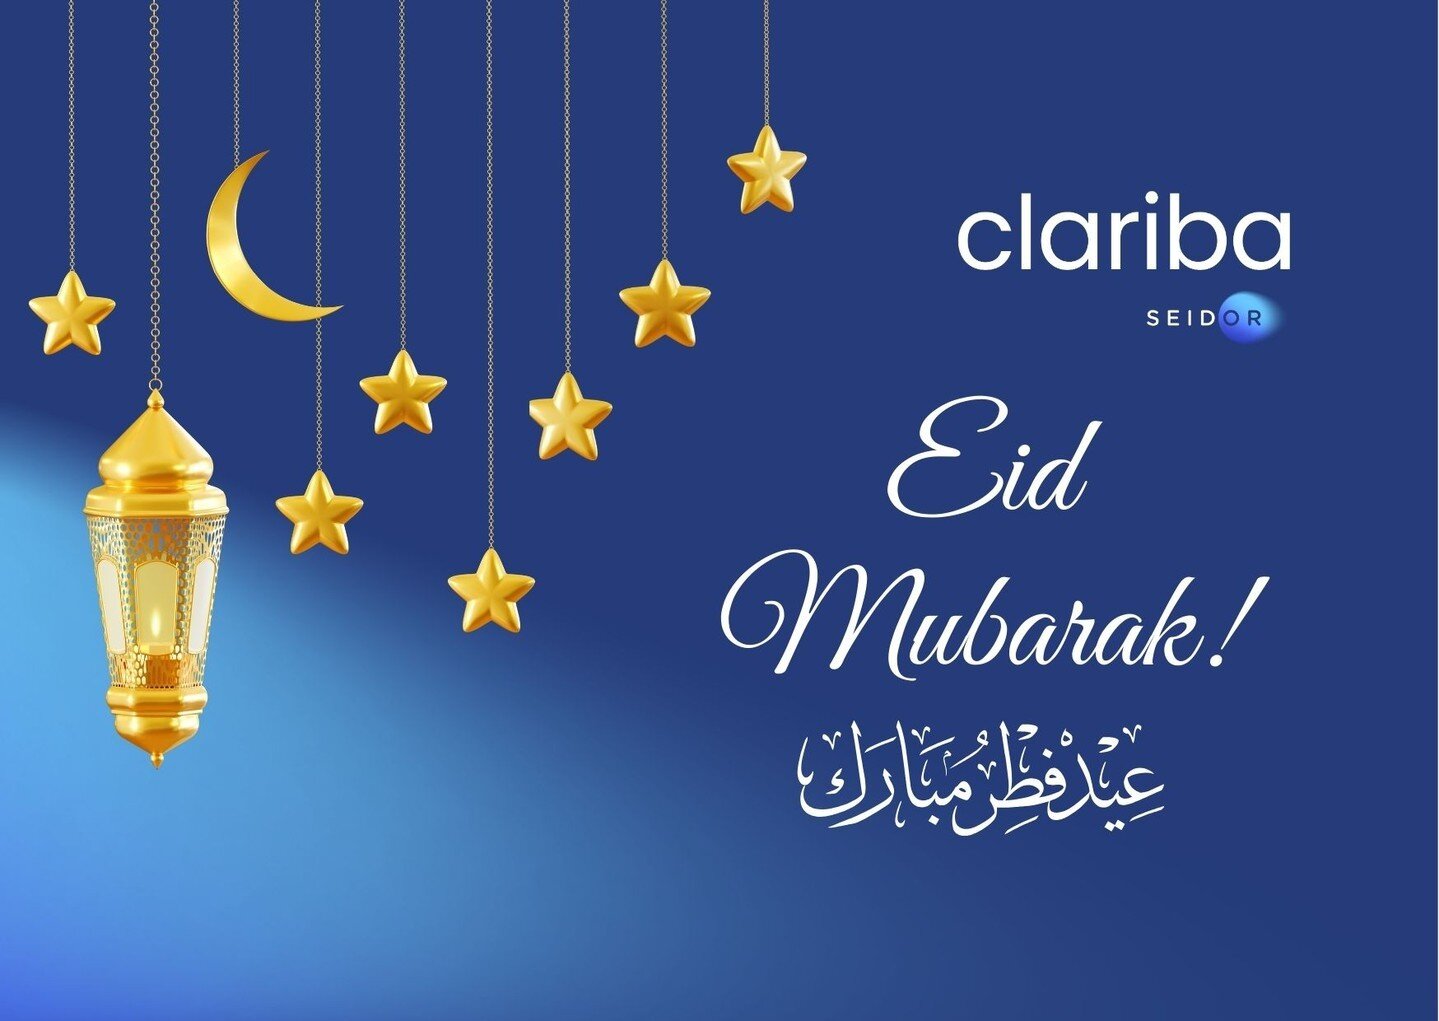 Eid Mubarak from Clariba SEIDOR! 
As we celebrate this joyous occasion, may the blessings of Eid fill your heart and home with peace, happiness, and prosperity. 
Wishing you and your loved ones a blessed Eid al-Fitr! 
 
#Eid #EidMubarak
#ClaribaSEIDO